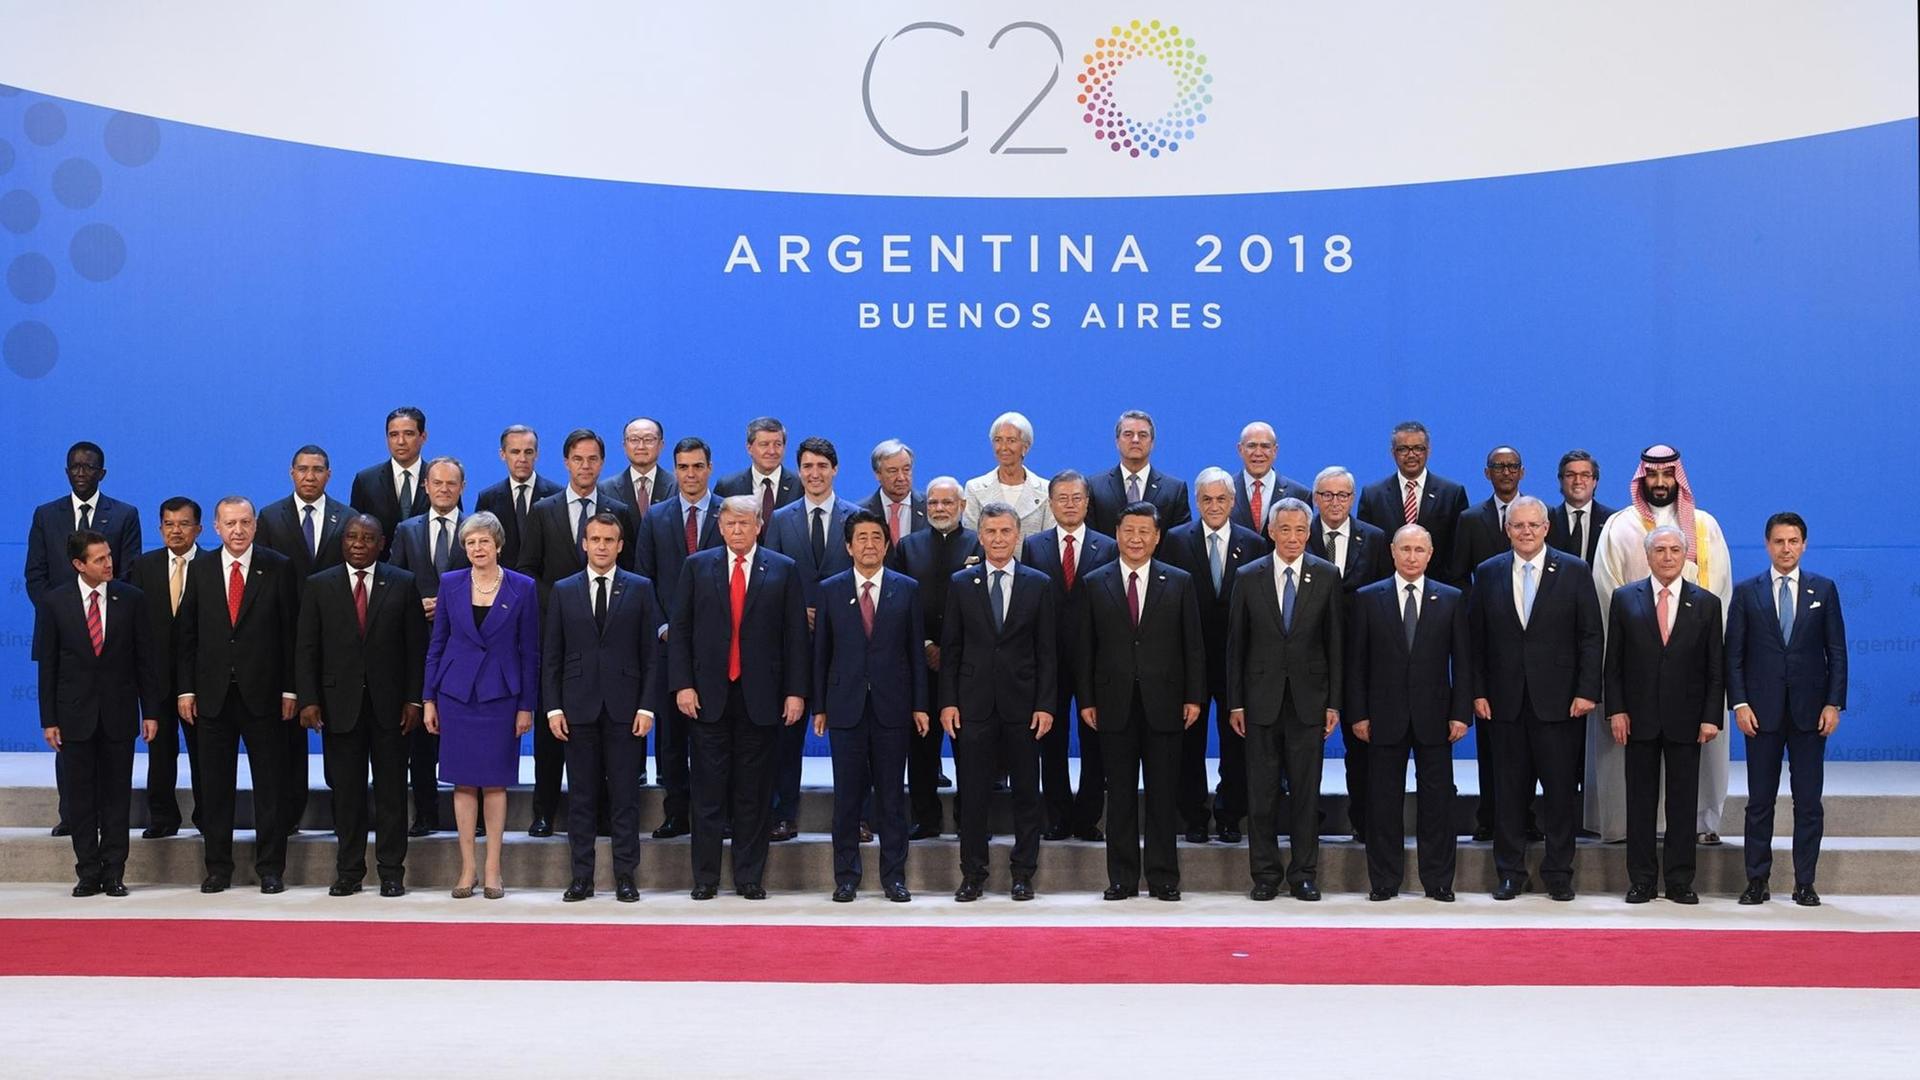 30.11.2018, Argentinien, Buenos Aires: 5716833 30.11.2018 Leaders pose for a family photo before the G20 summit in Buenos Aires, Argentina, November 30, 2018. Vladimir Astapkovich / Sputnik Foto: Vladimir Astapkovich/Sputnik/dpa |